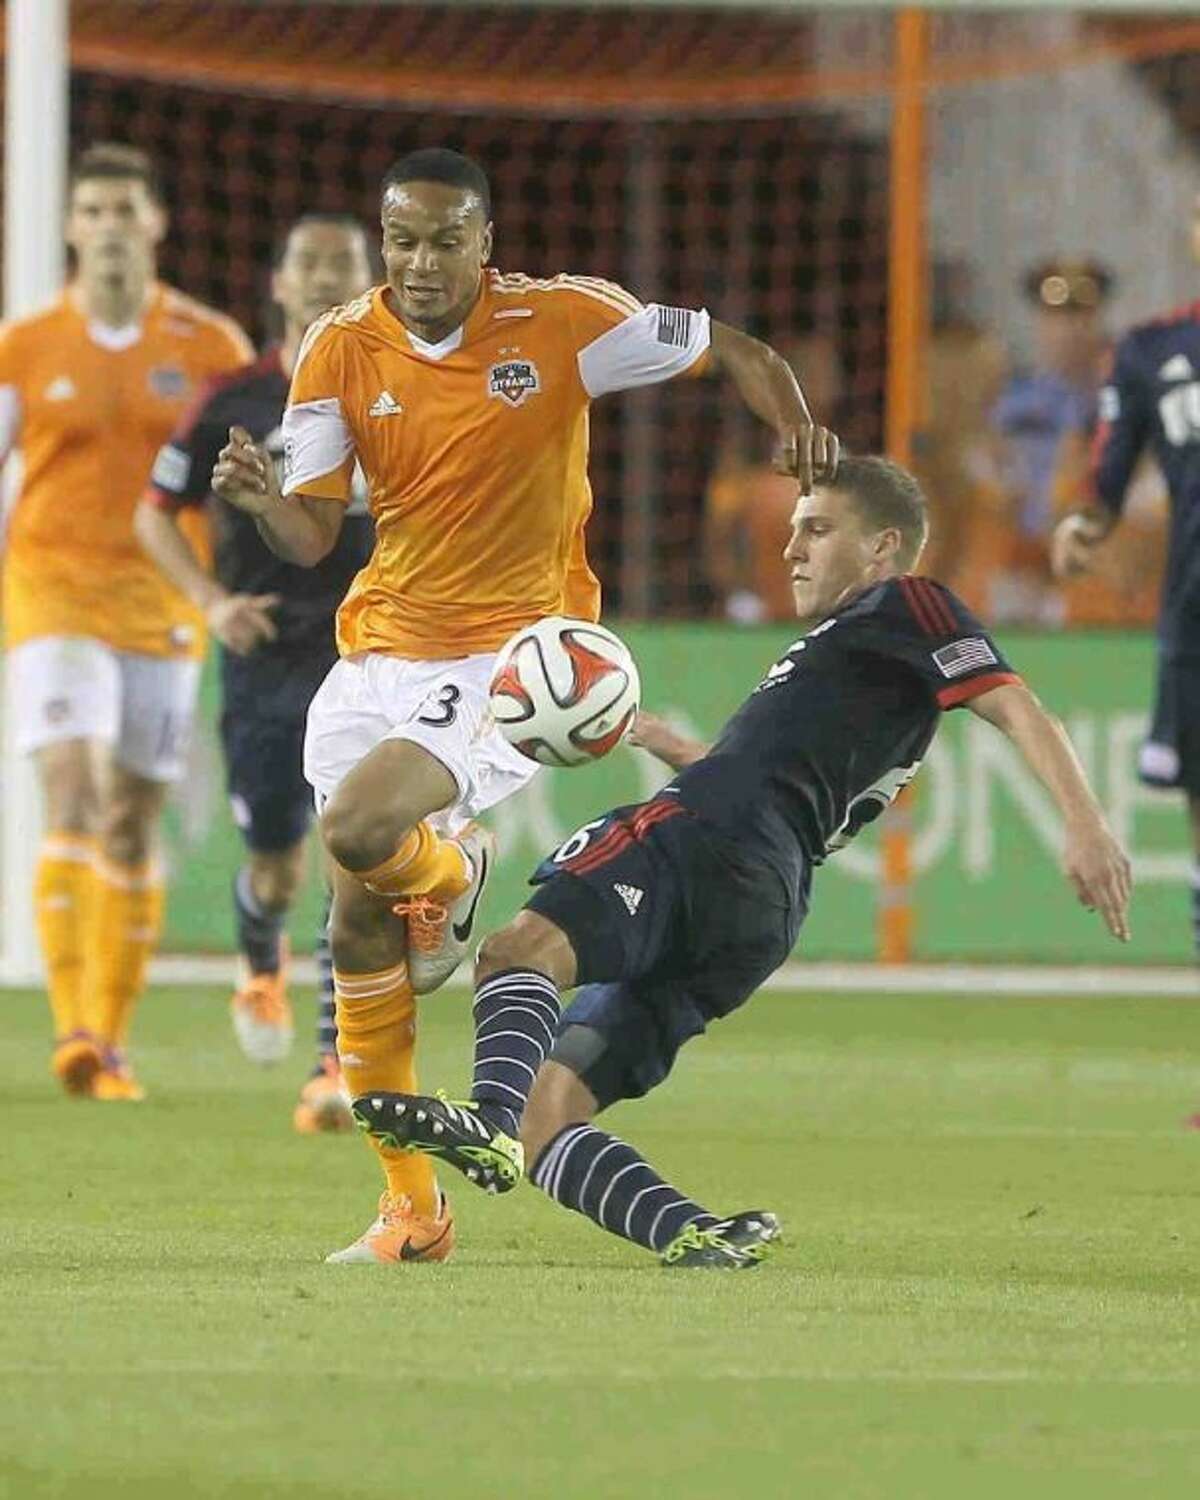 New England Revolution midfielder Scott Caldwell (6) goes for the ball against Houston Dynamo midfielder Ricardo Clark (13) during the first half of an MLS soccer game Saturday. The Dynamo won 4-0.